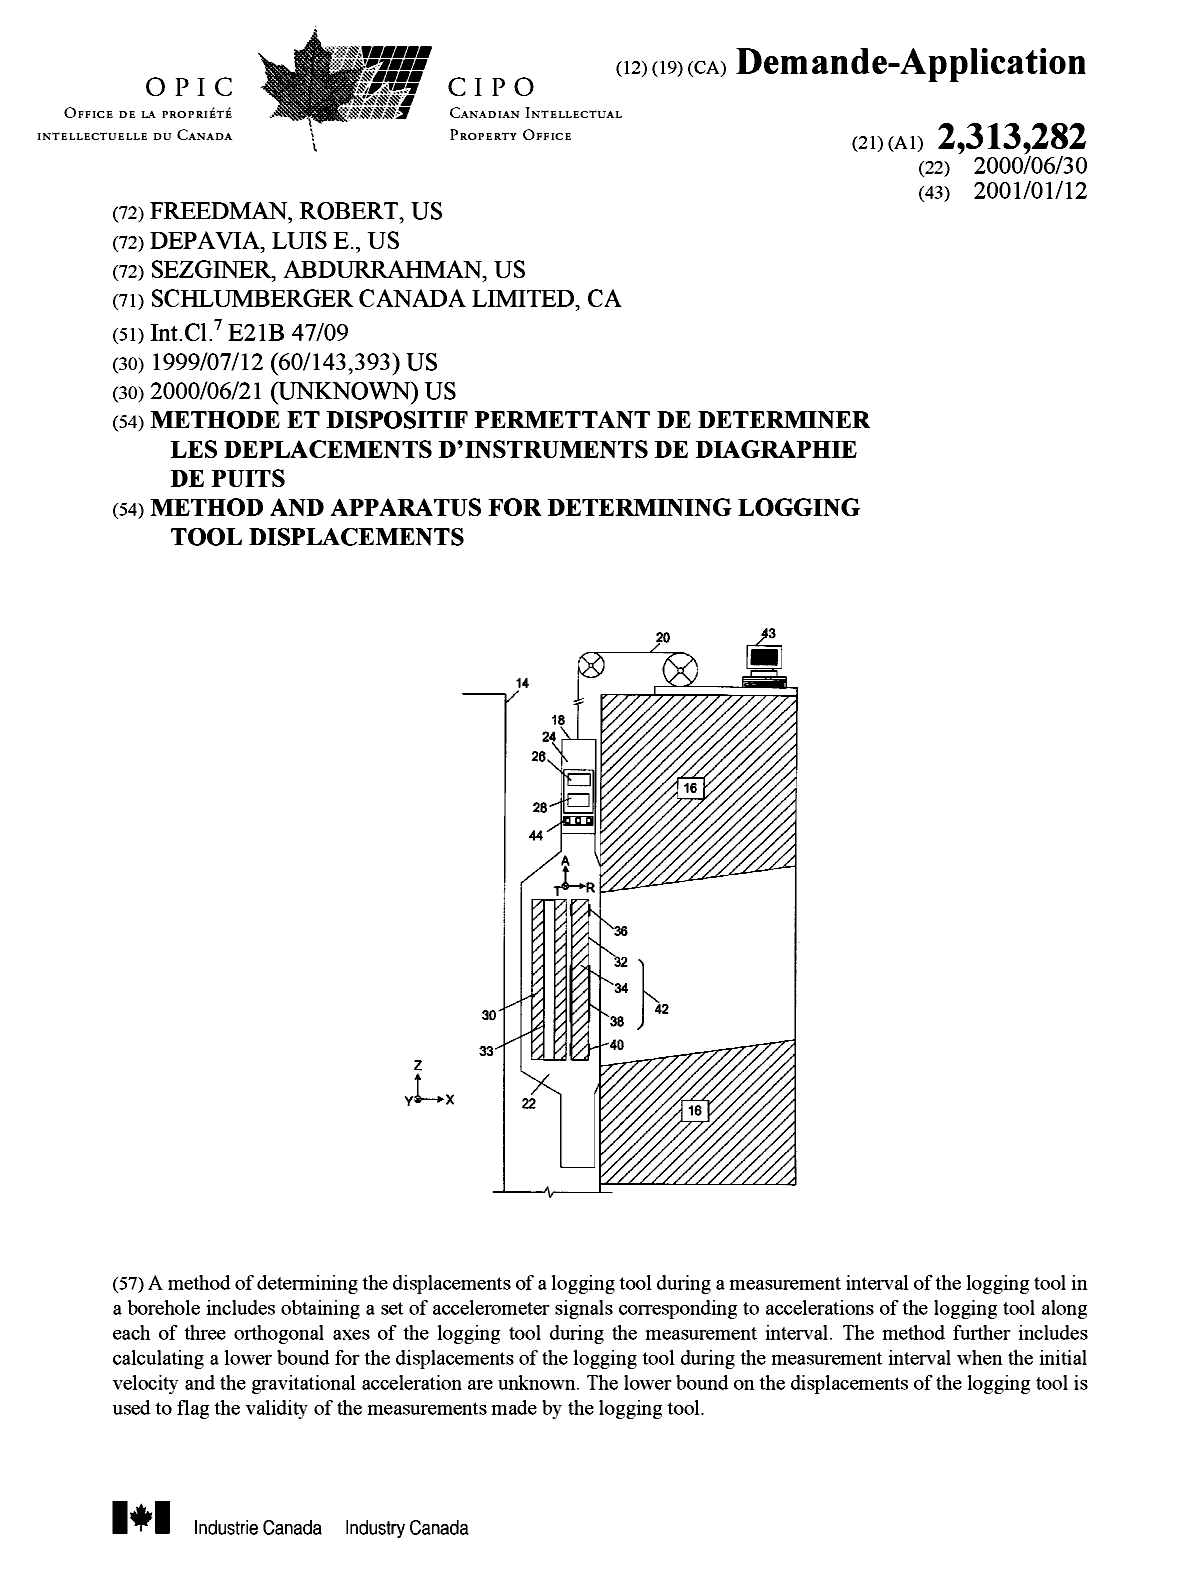 Canadian Patent Document 2313282. Cover Page 20010103. Image 1 of 1